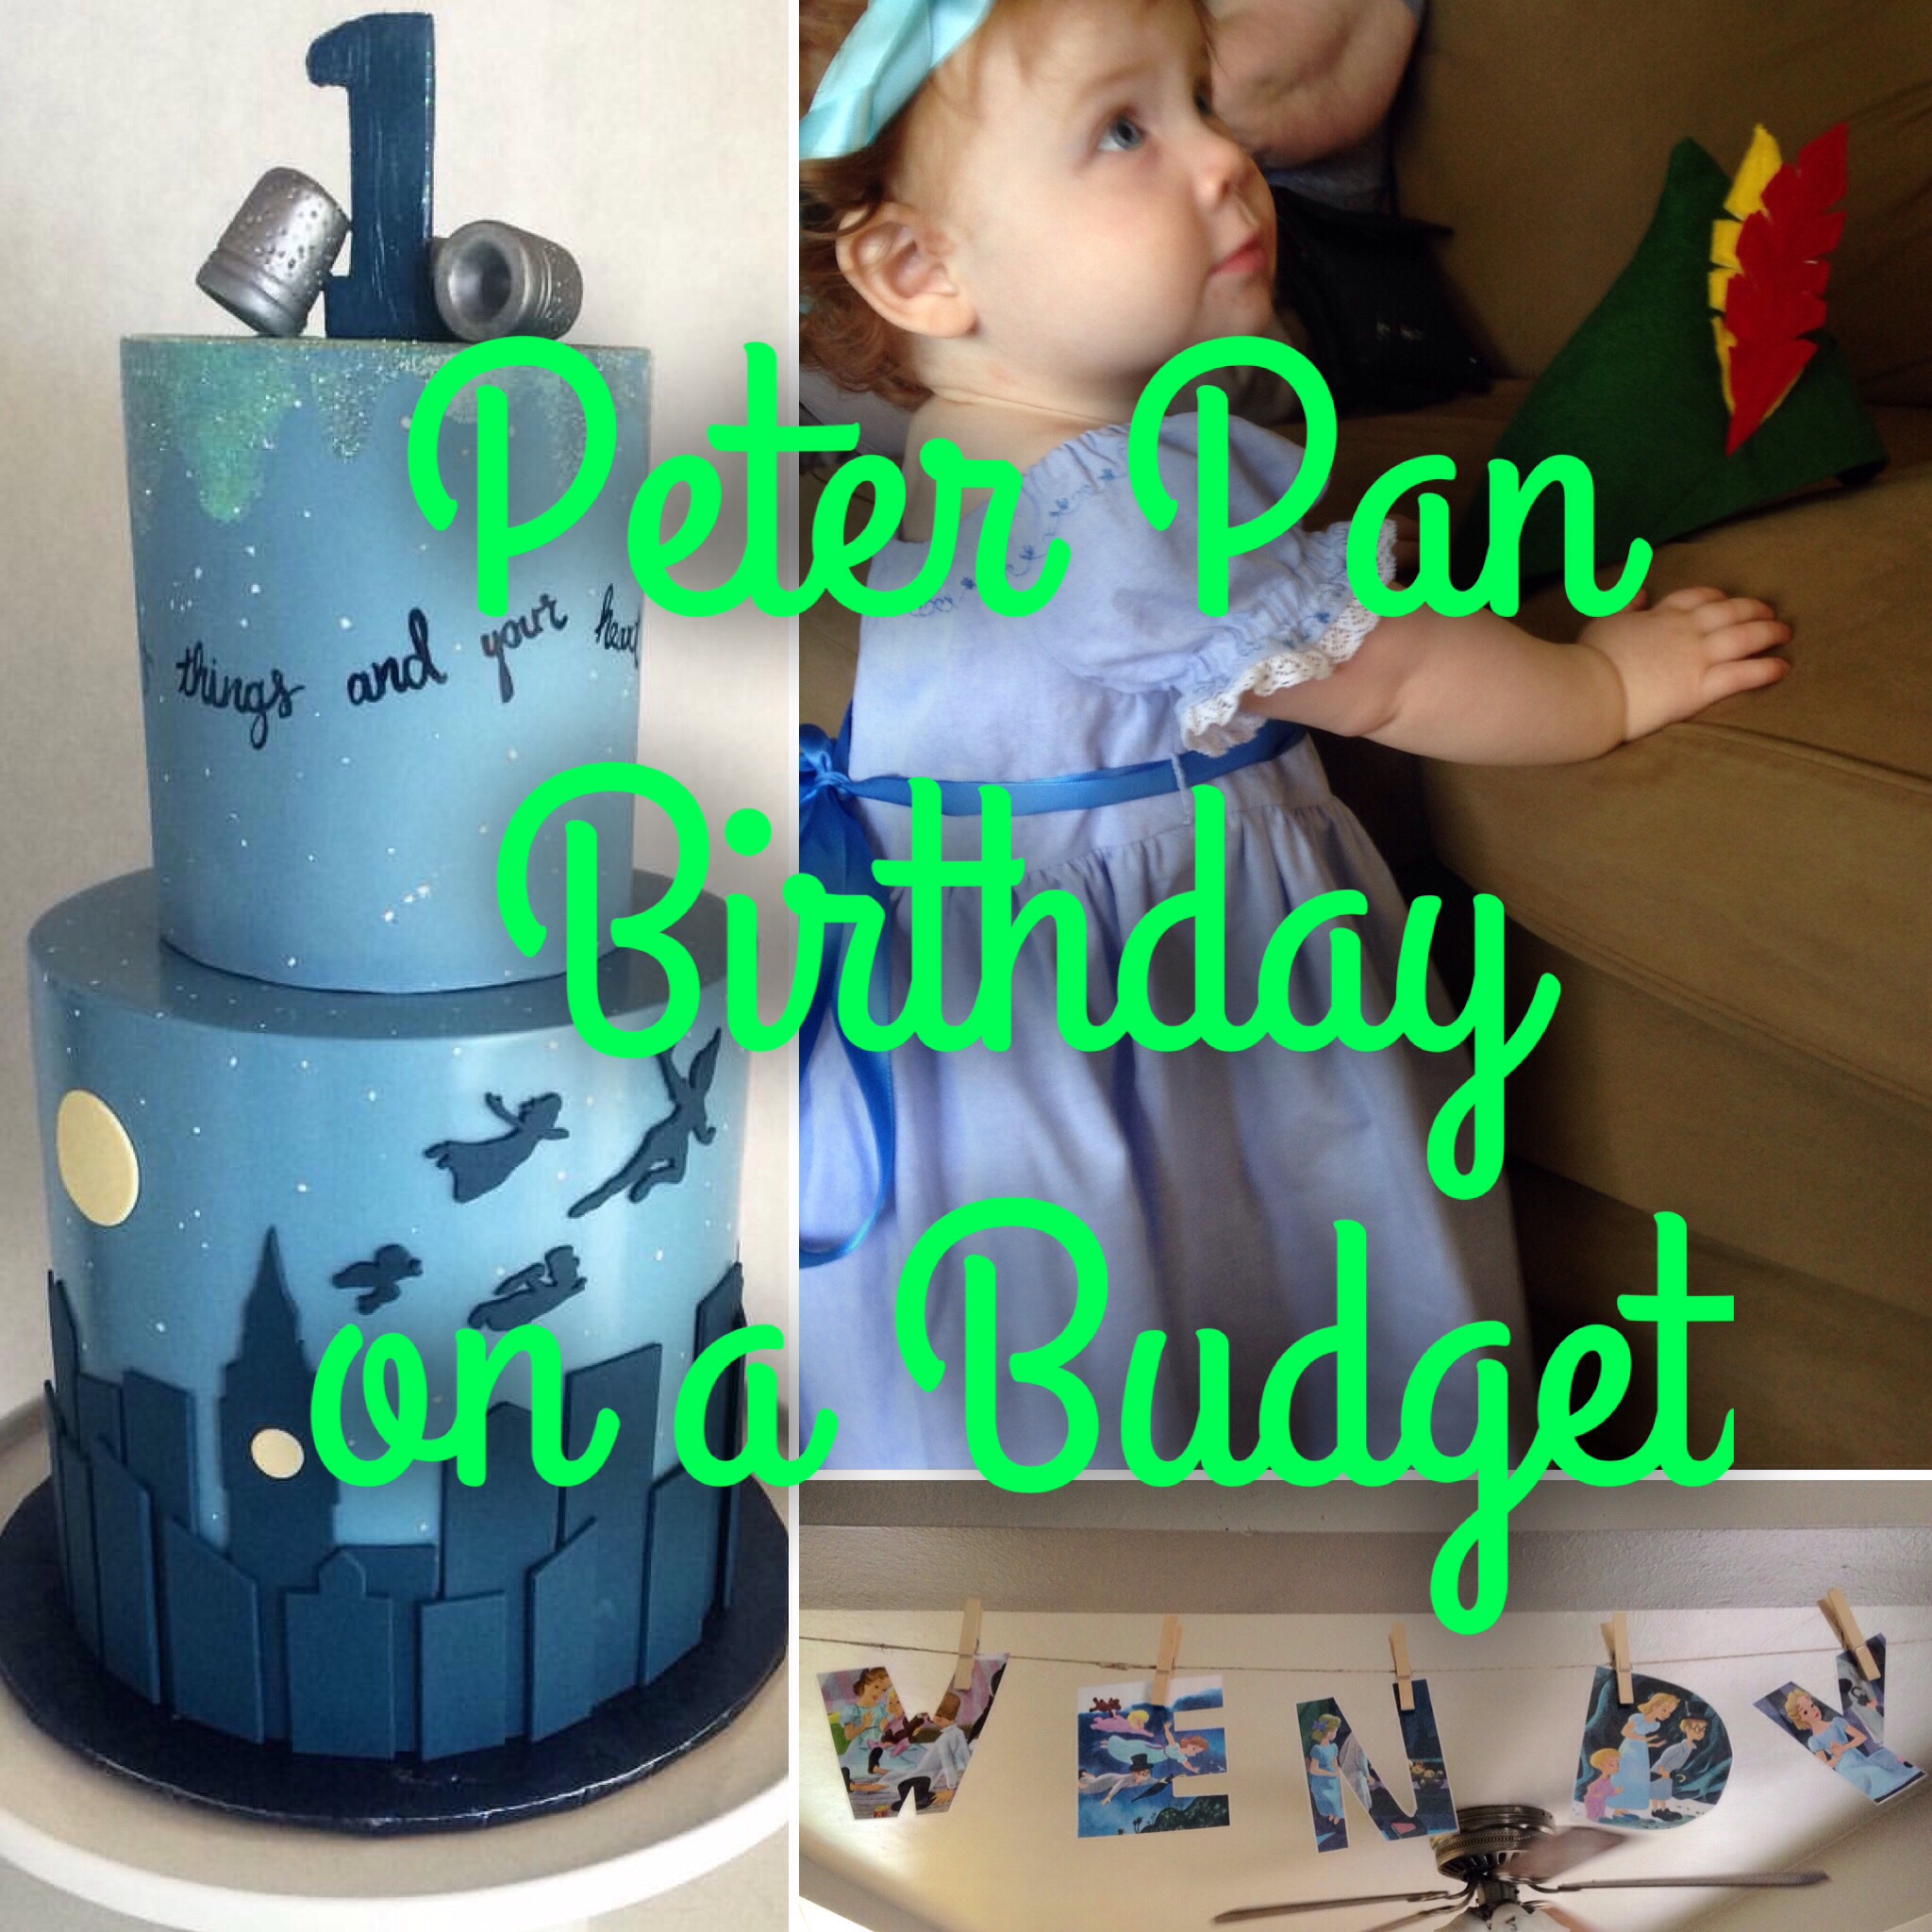 Peter Pan Birthday on a Budget! - The Bitty-Bits Blog